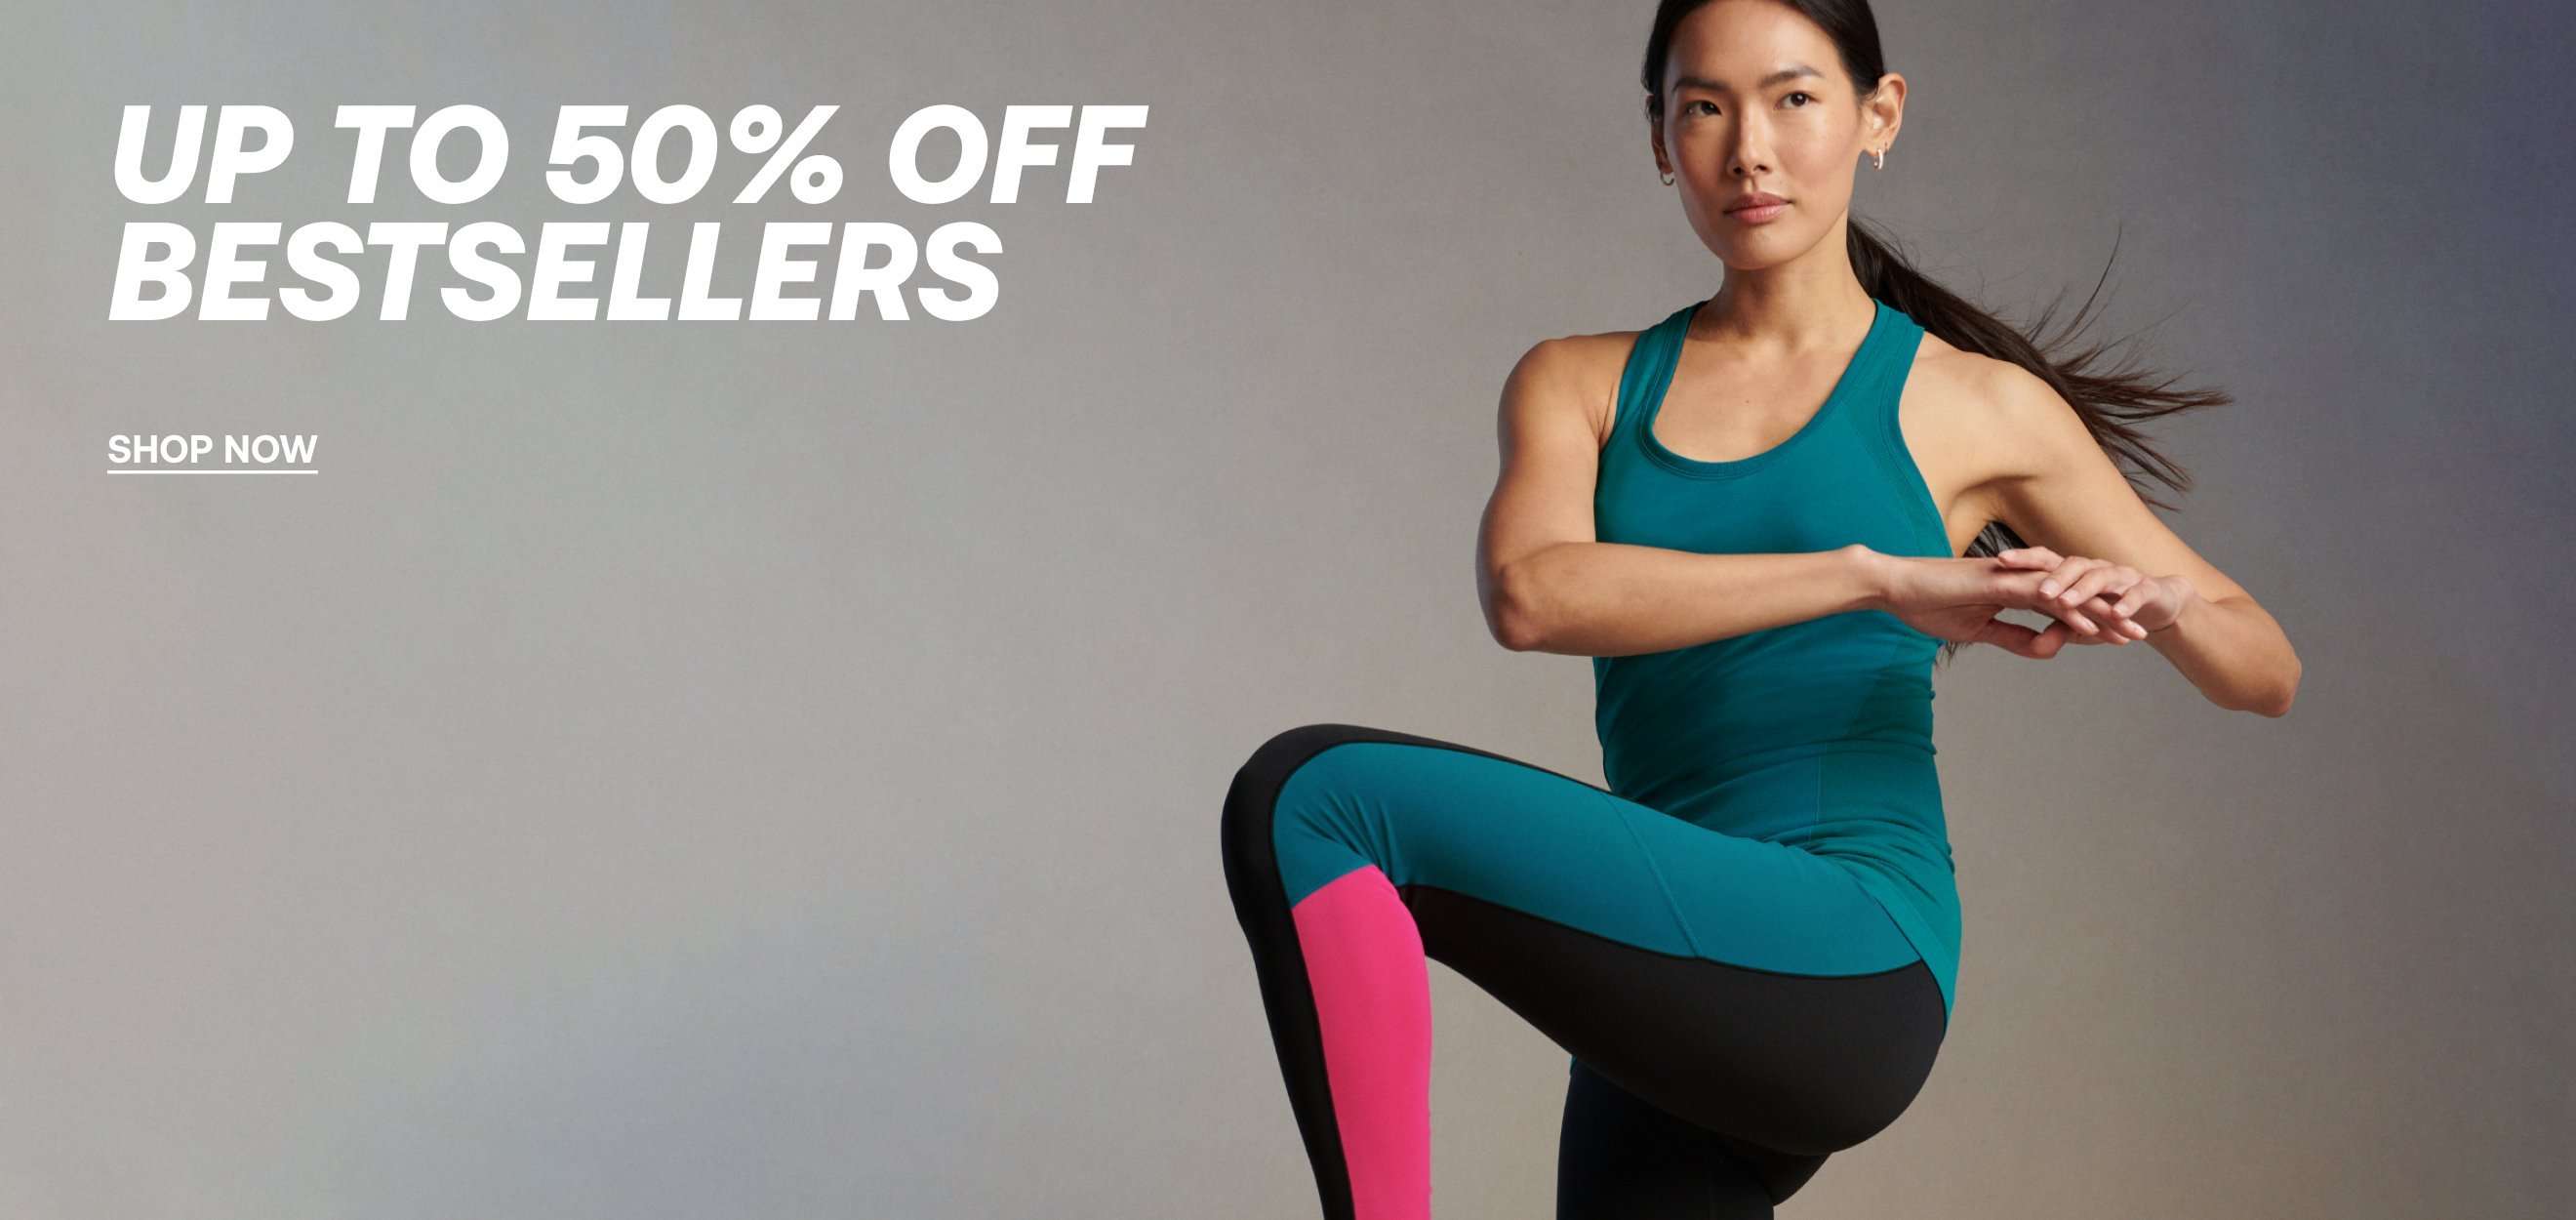 Up to 50% off Bestsellers